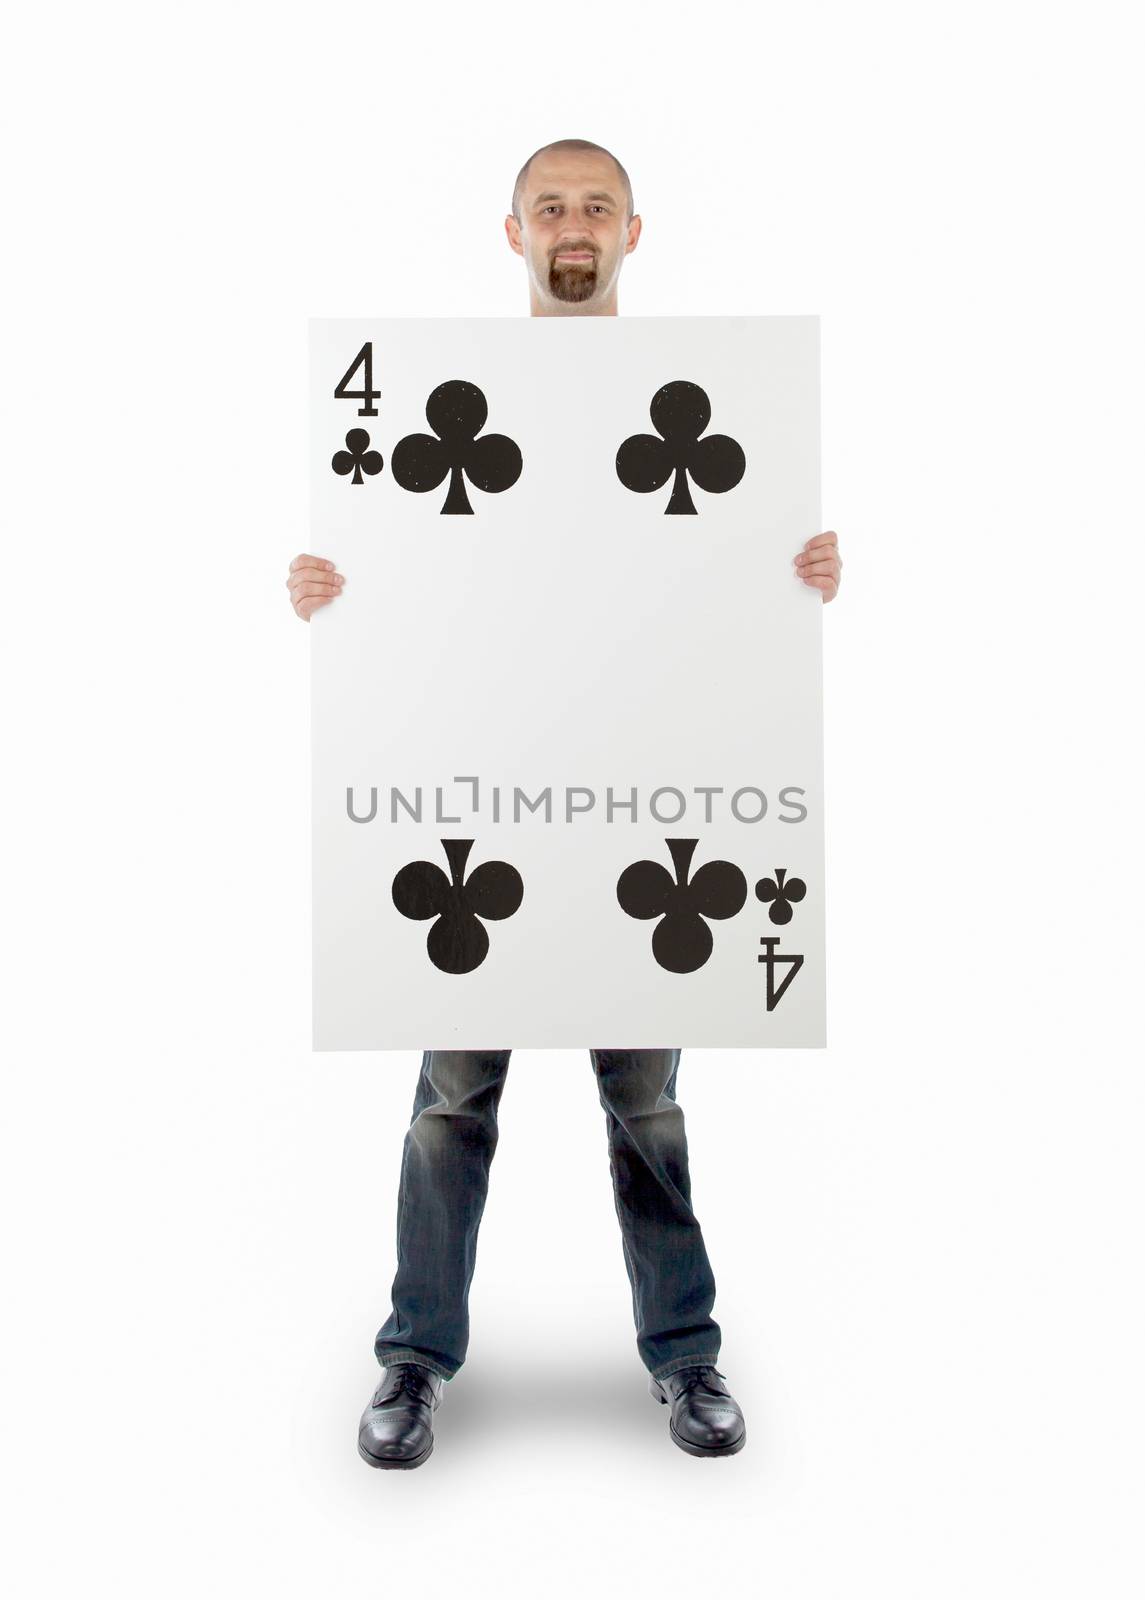 Businessman with large playing card - Four of clubs